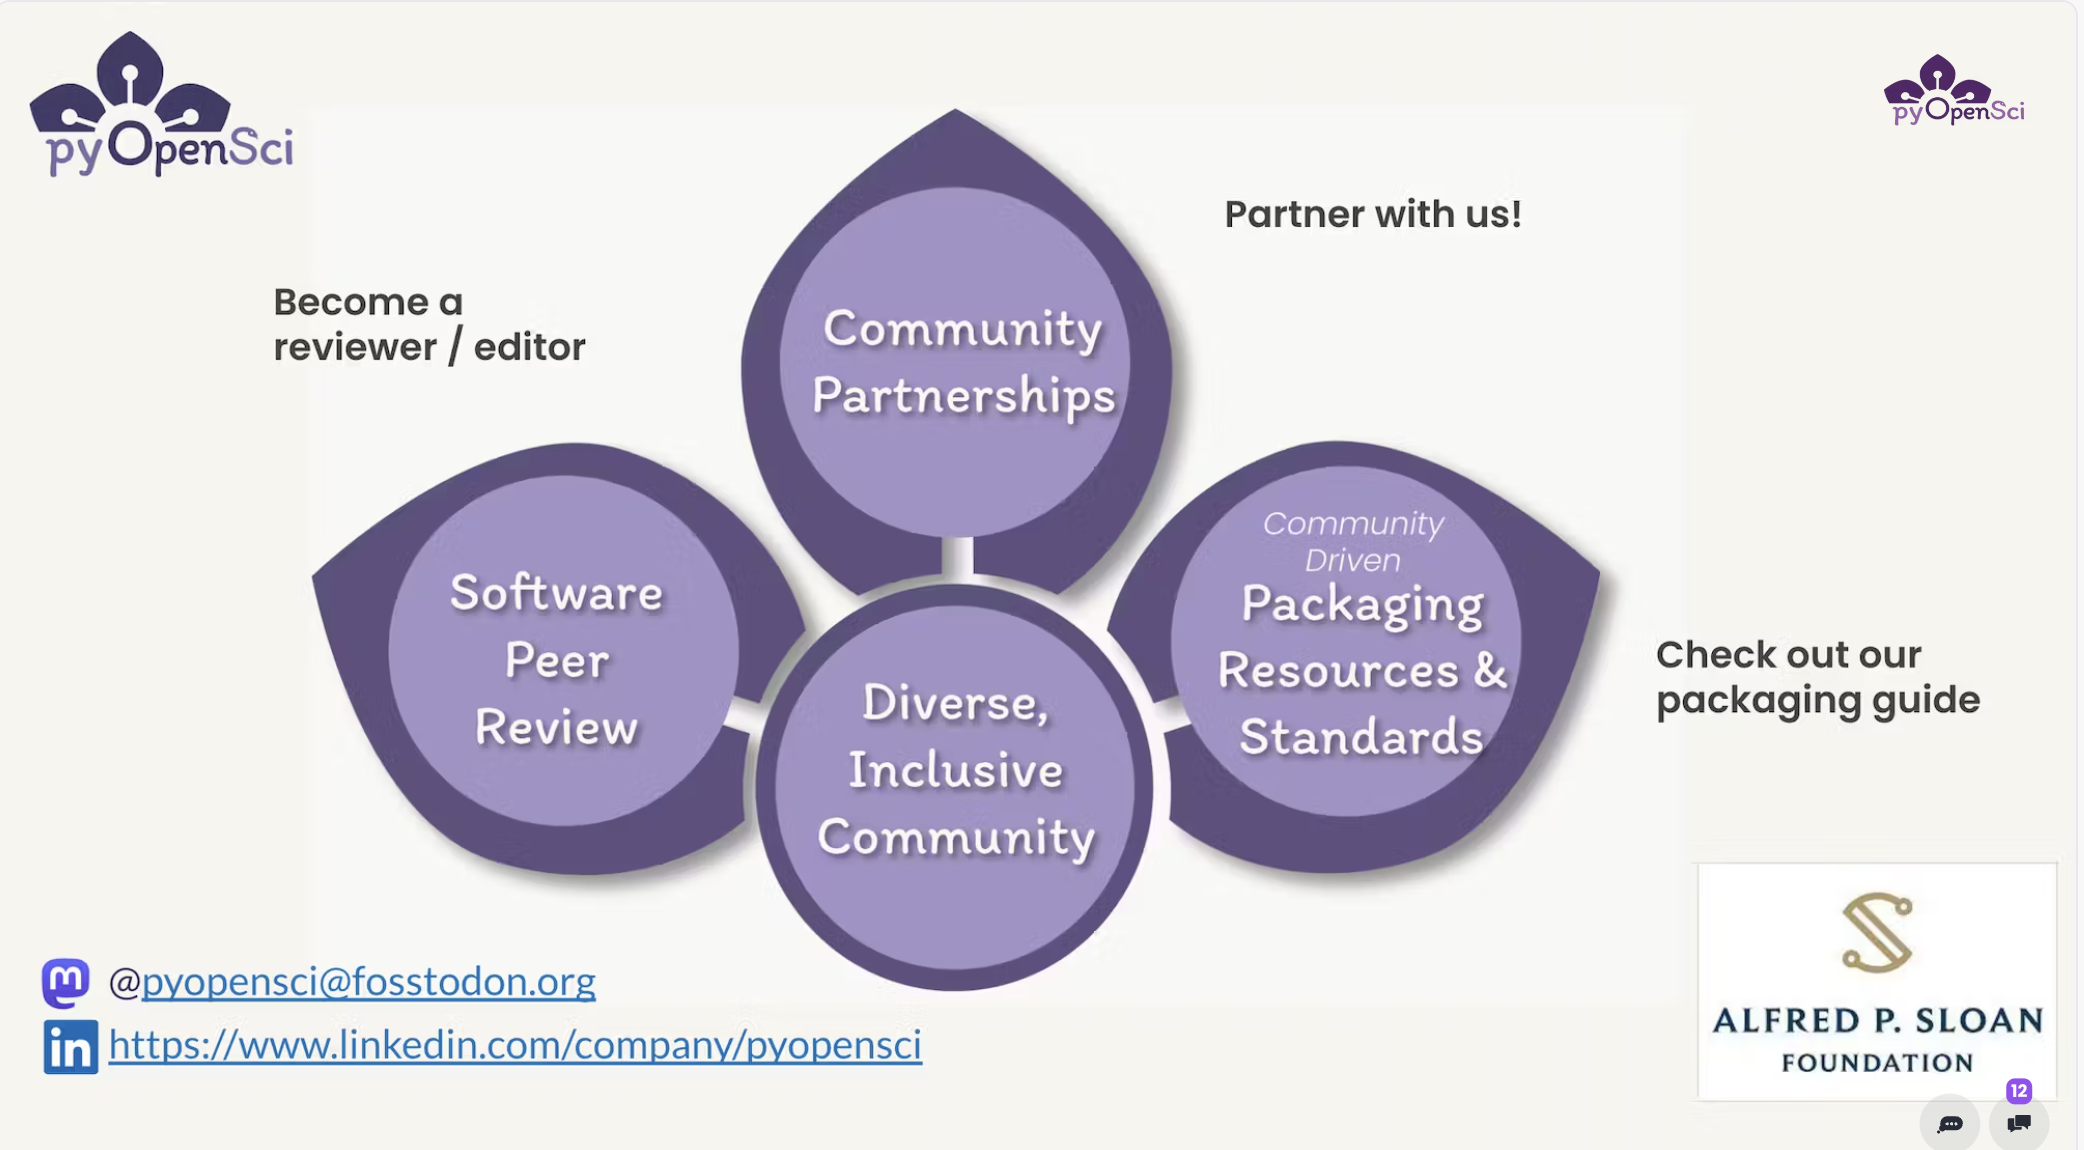 A flower image with three petals - software peer review, community partnerships and packaging resources. at the center of the flower it says diverse, inclusive community